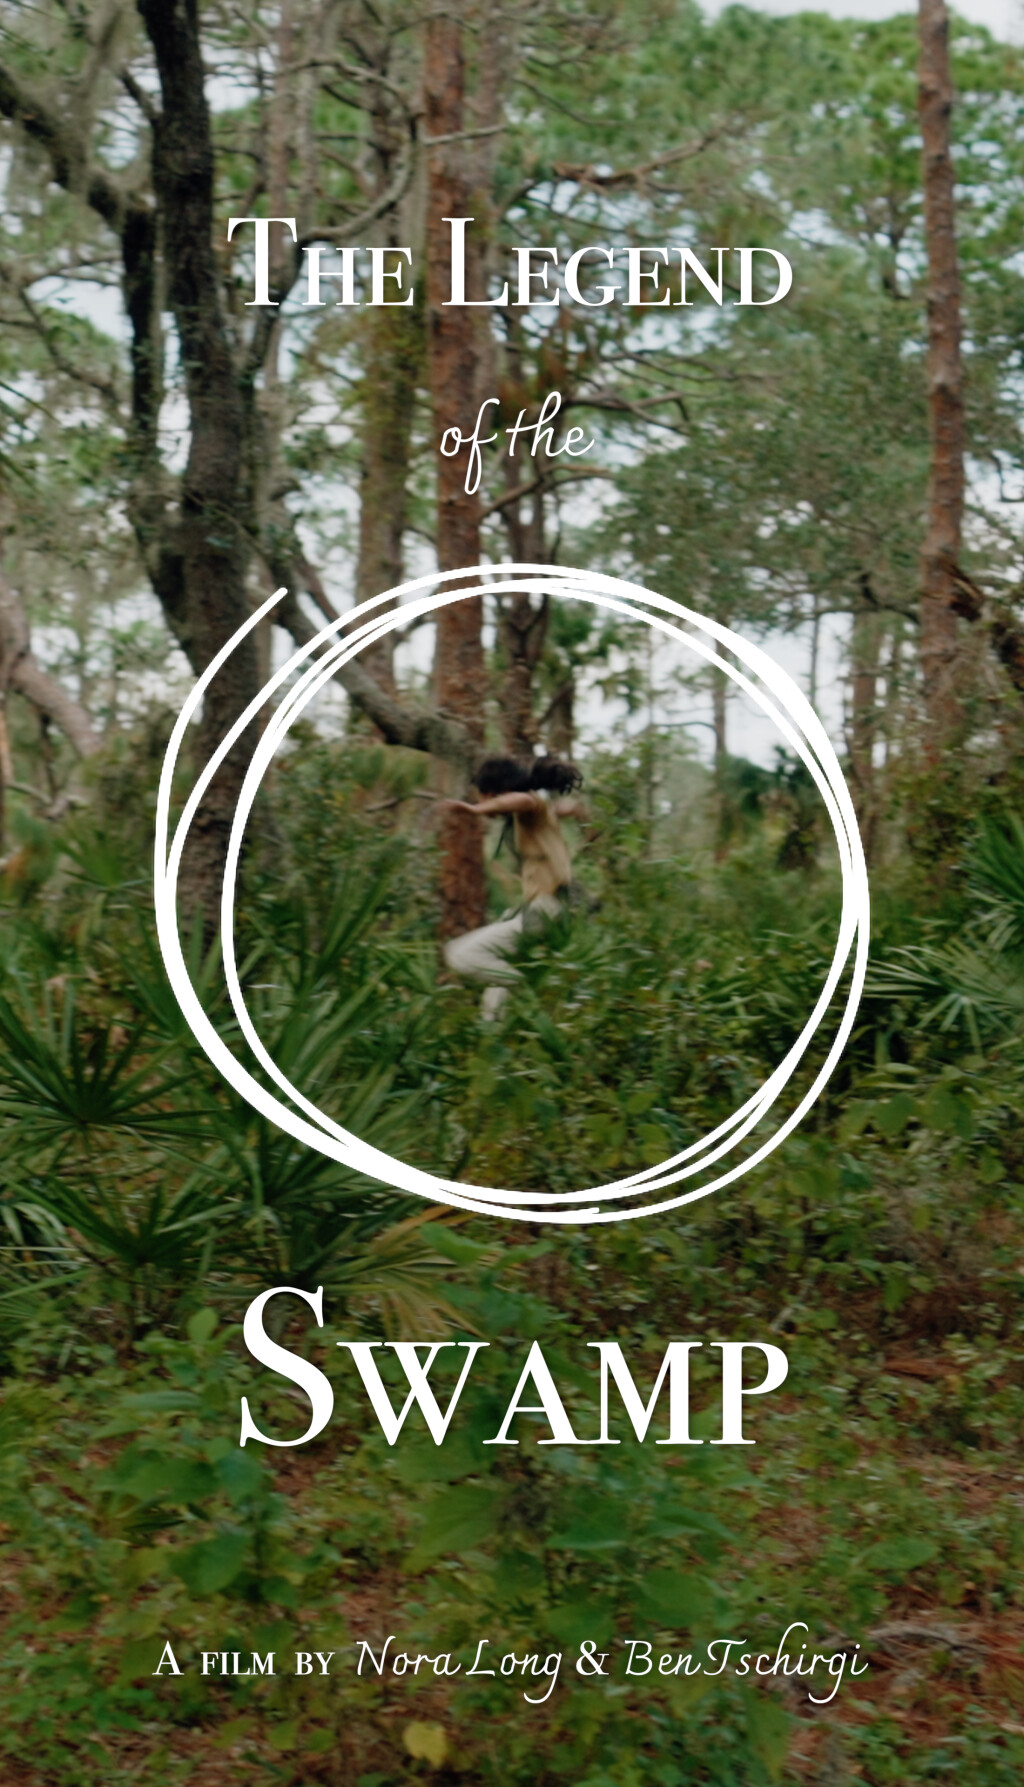 Filmposter for The Legend of the Swamp